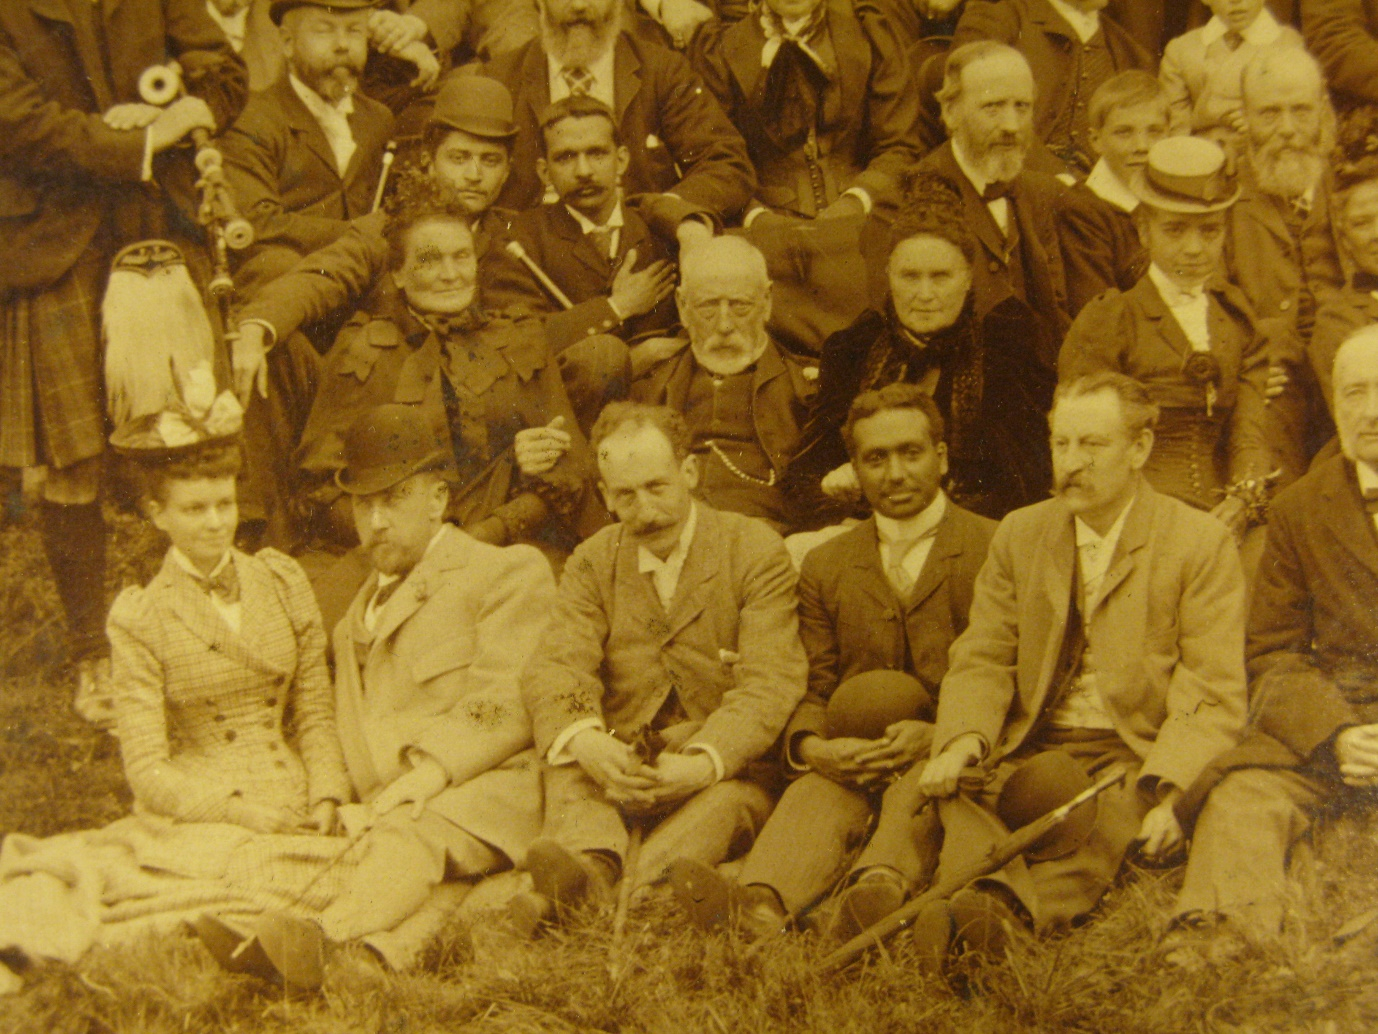 LDRPS: SZ2045 This photograph shows international pharmacists L. Jaques, F. Komplé, and L. Marie from Mauritius. They are sitting in a group portrait, at the British Pharmaceutical Conference at Kilin, Scotland, 1892